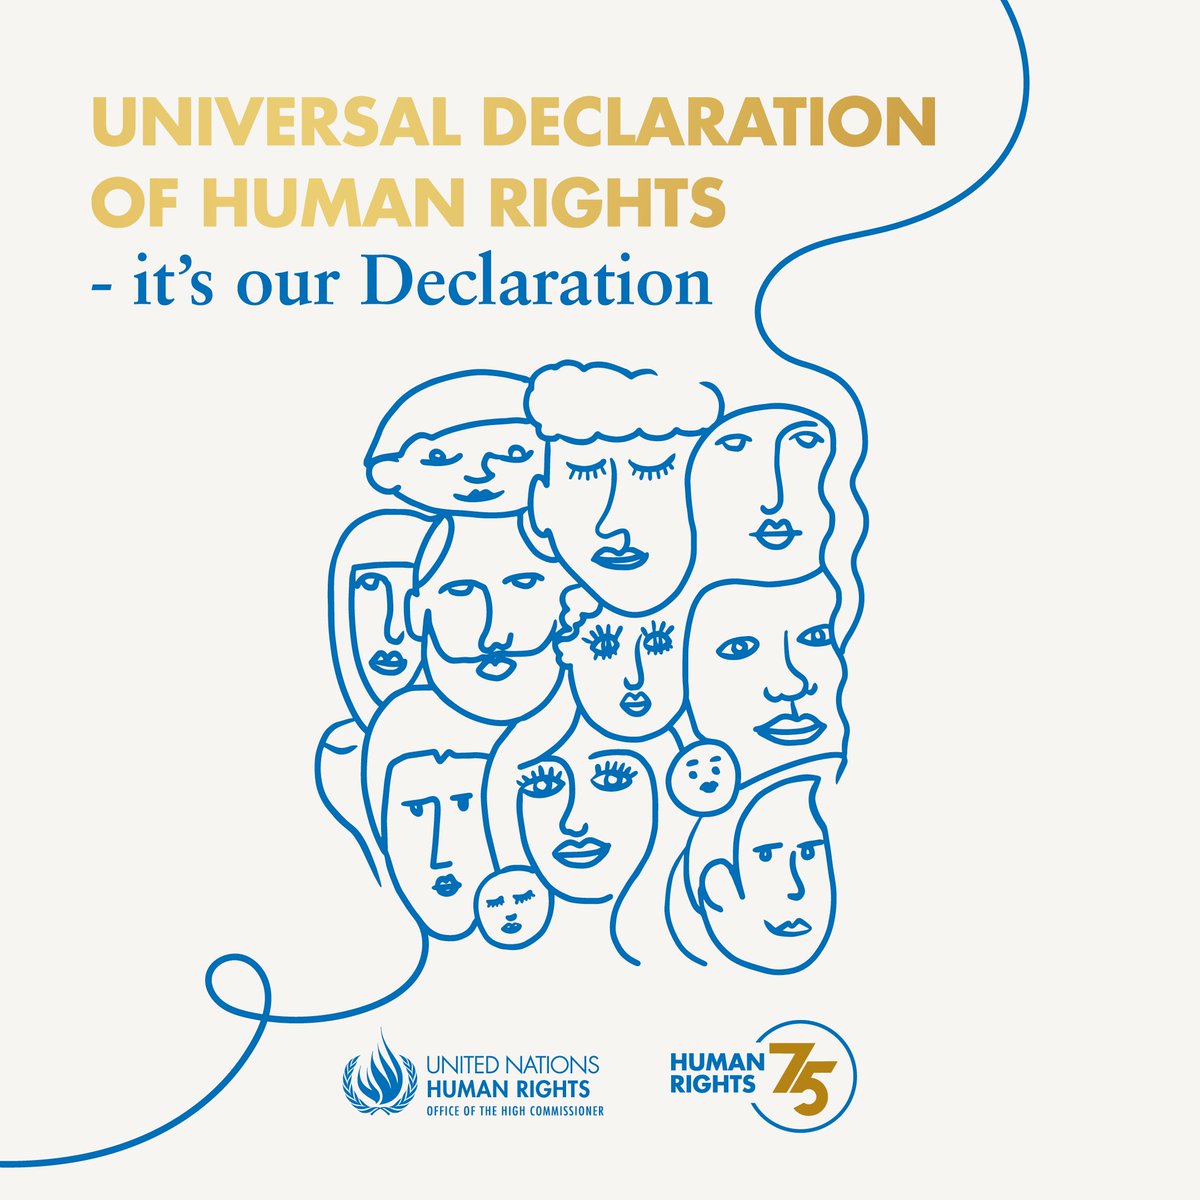 Today...the #UniversalDeclarationofHumanRights at 75...were we bolder and more ambitious in 1948...We know we can and must do more on all these fronts across regions... @OHCHRAsia @UNHumanright @ILOAsiaPacific @UNICEF_EAPRO @UNFPAAsiaPac @UNDPasiapac @USIP @ICRC @Oxfam